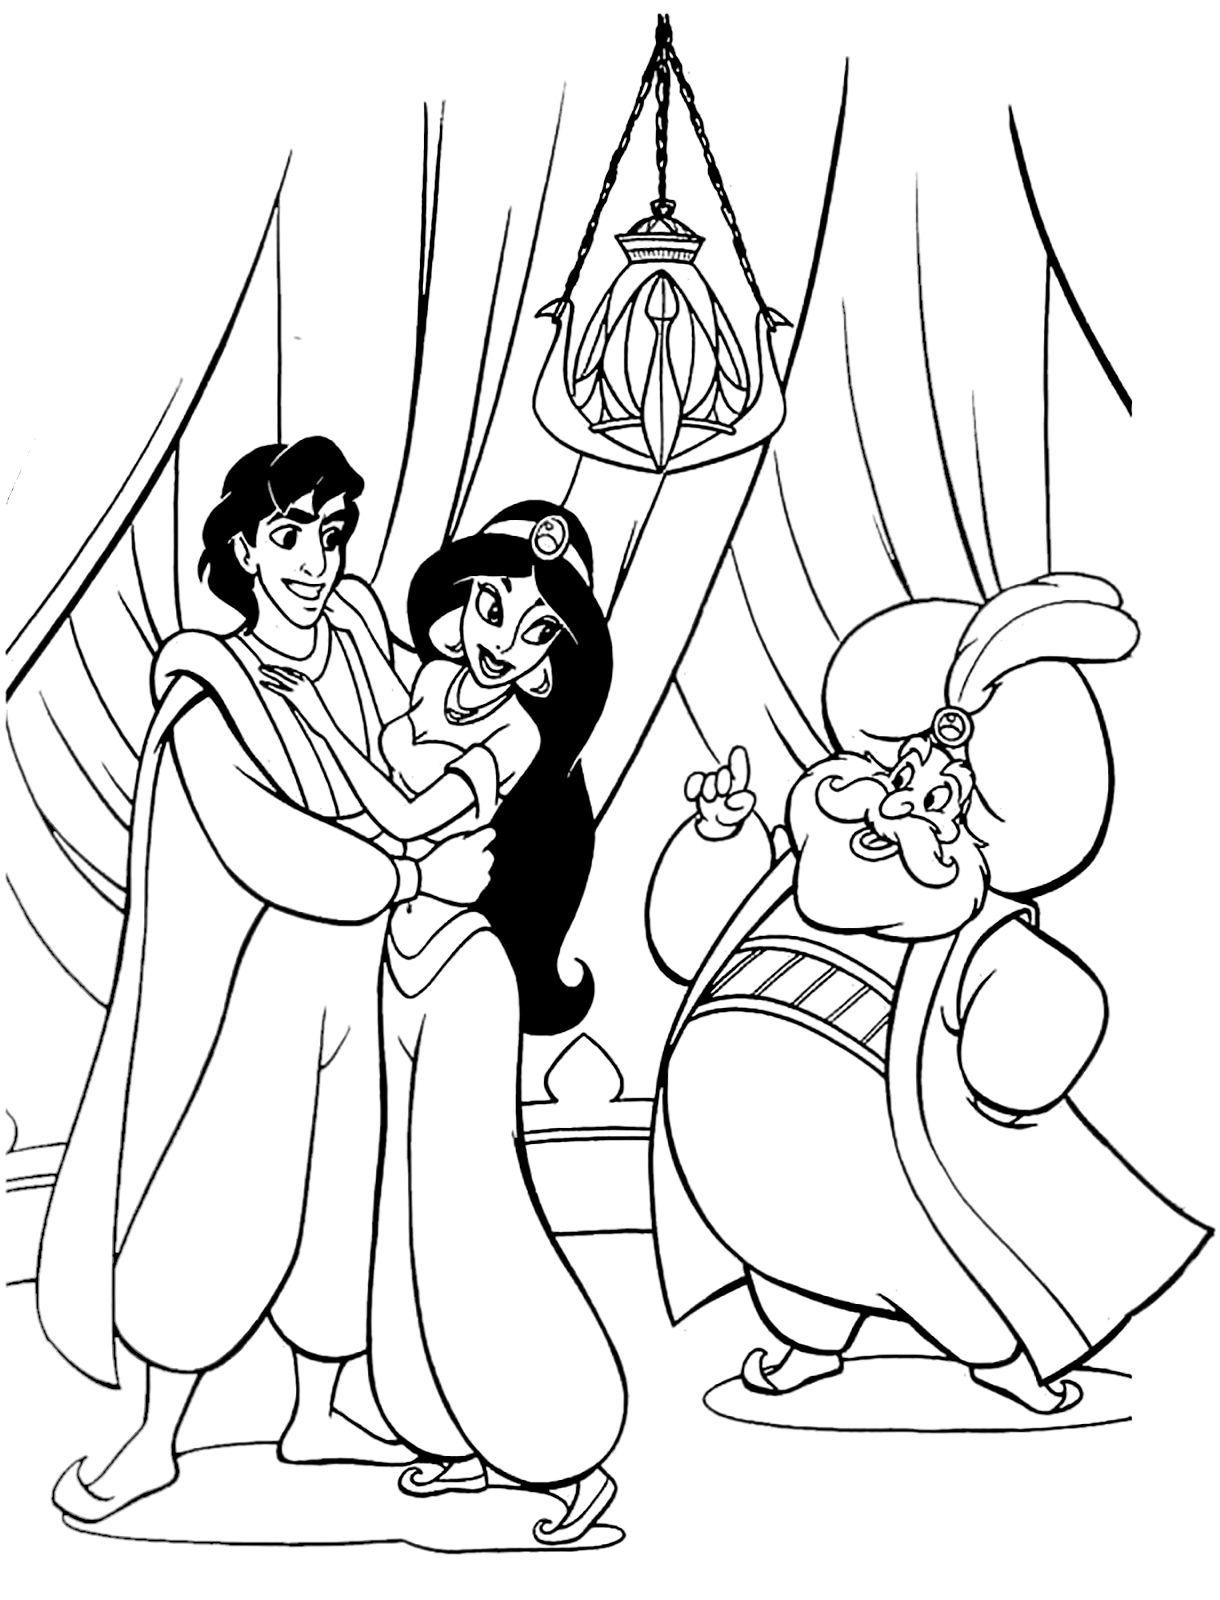 Aladdin - Aladdin and Jasmine receive the blessing from the Sultan of Agrabah